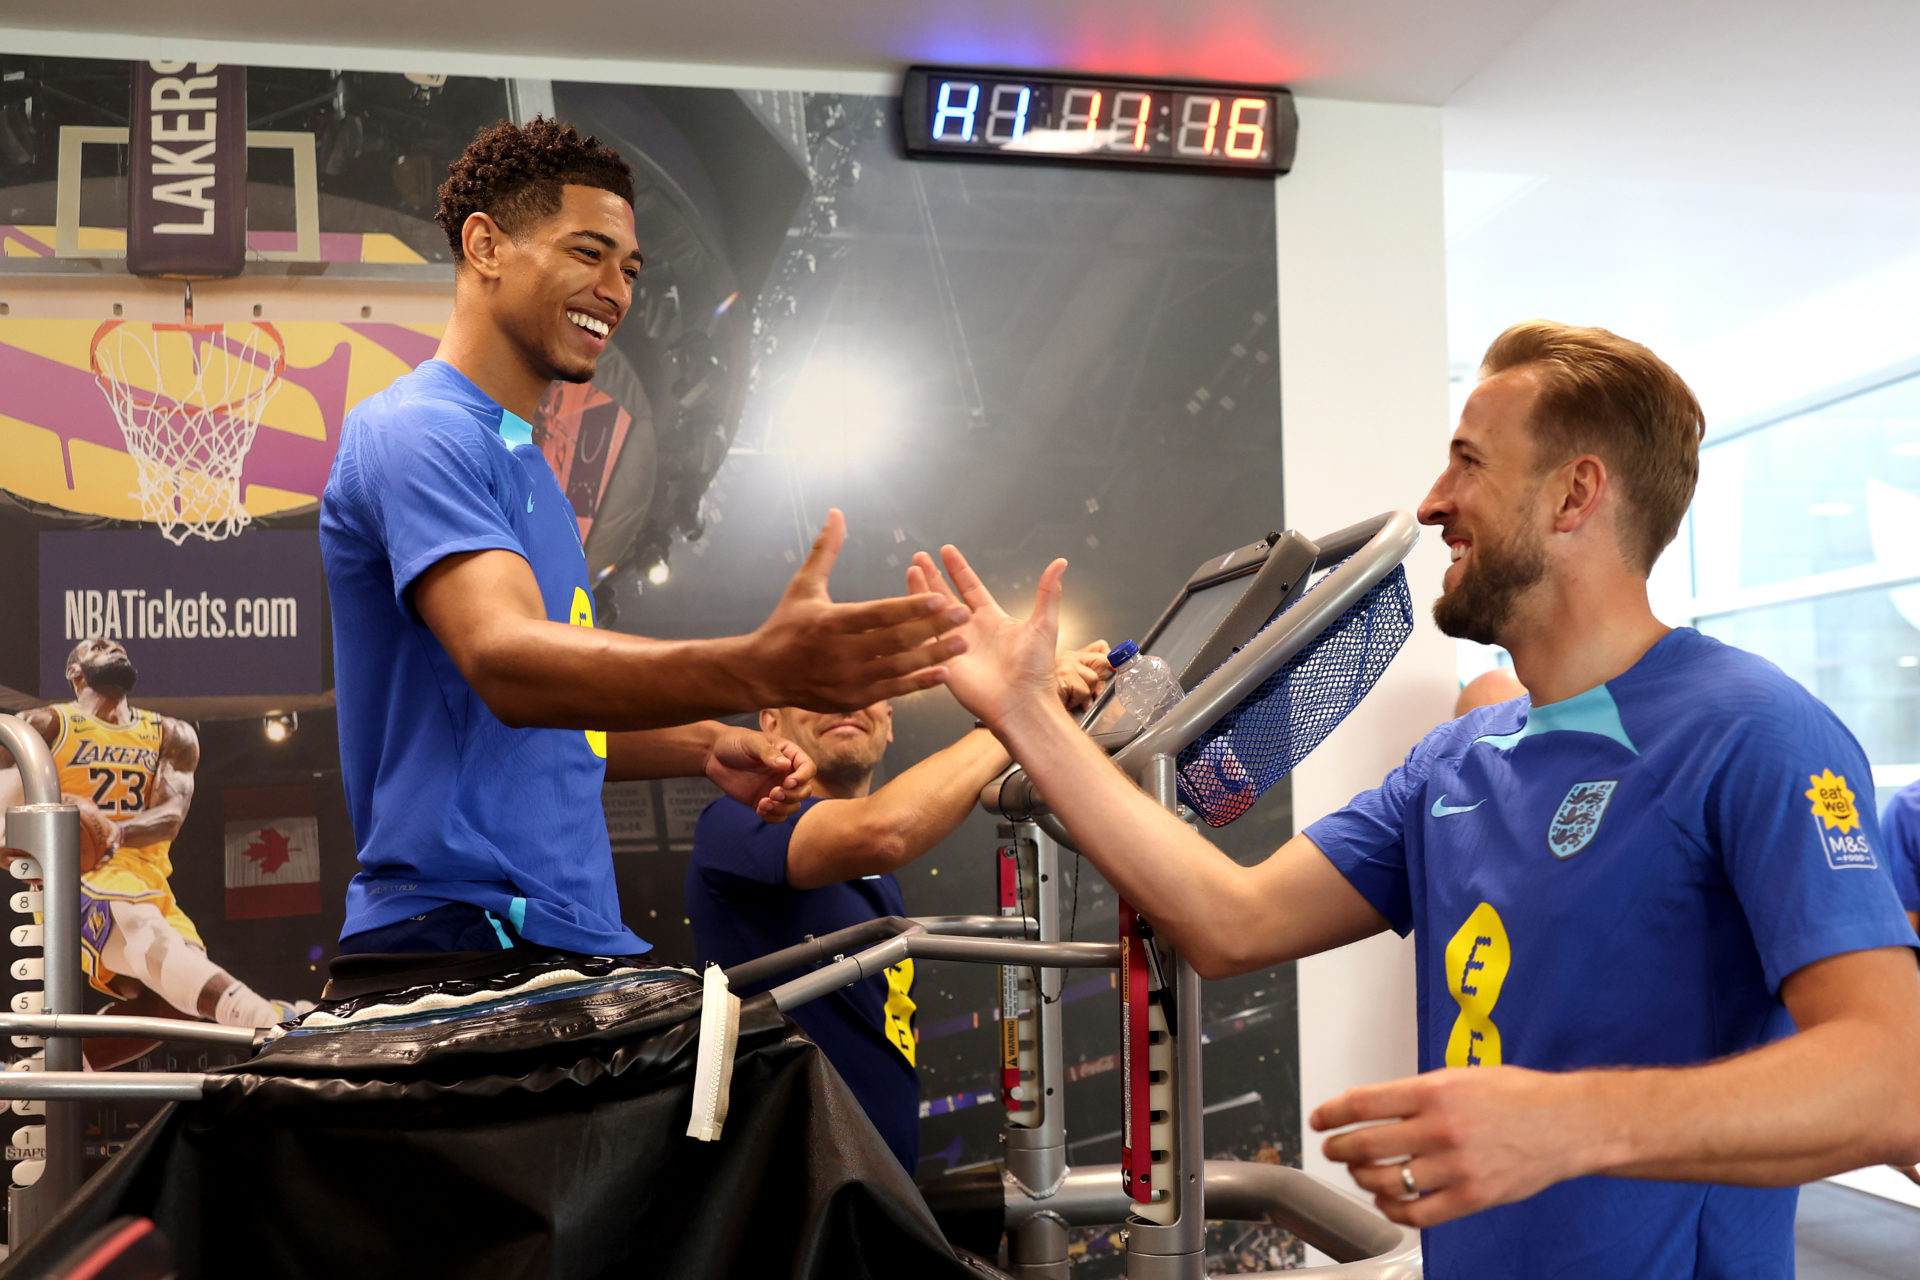  Harry Kane and Jude Bellingham, both wearing blue England training shirts, shake hands while walking on treadmills in the gym.